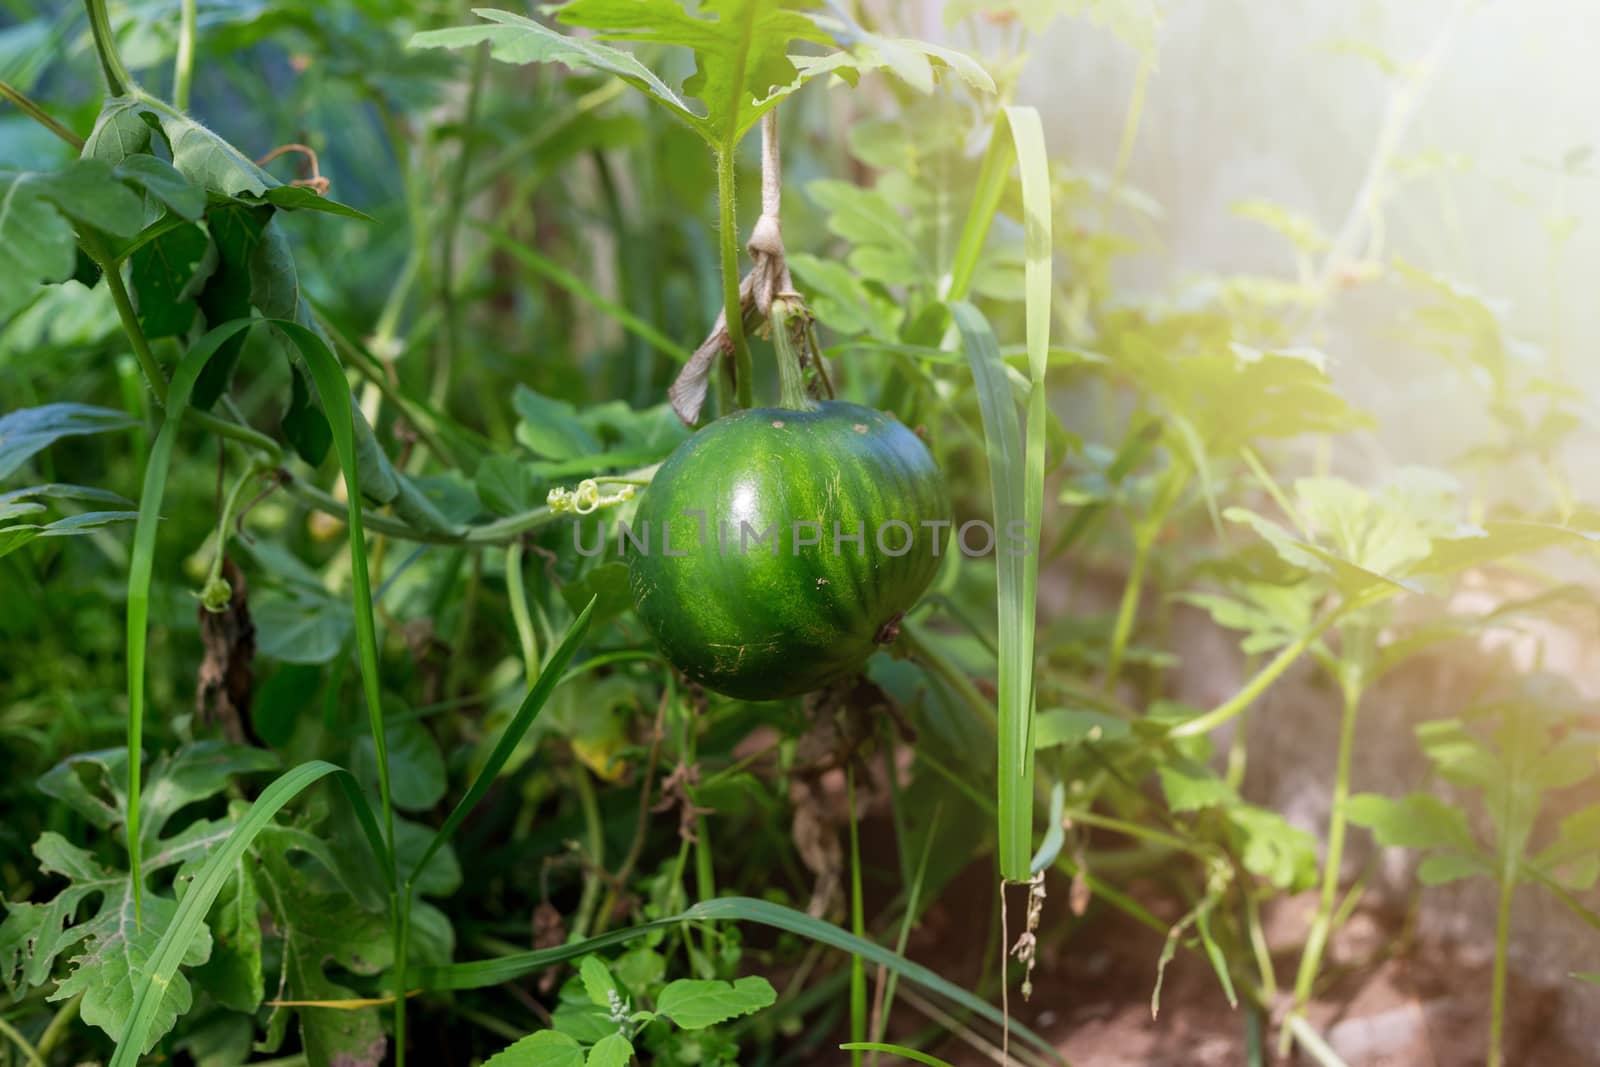 Growing watermelon in a greenhouse. A small watermelon is ripening in the garden